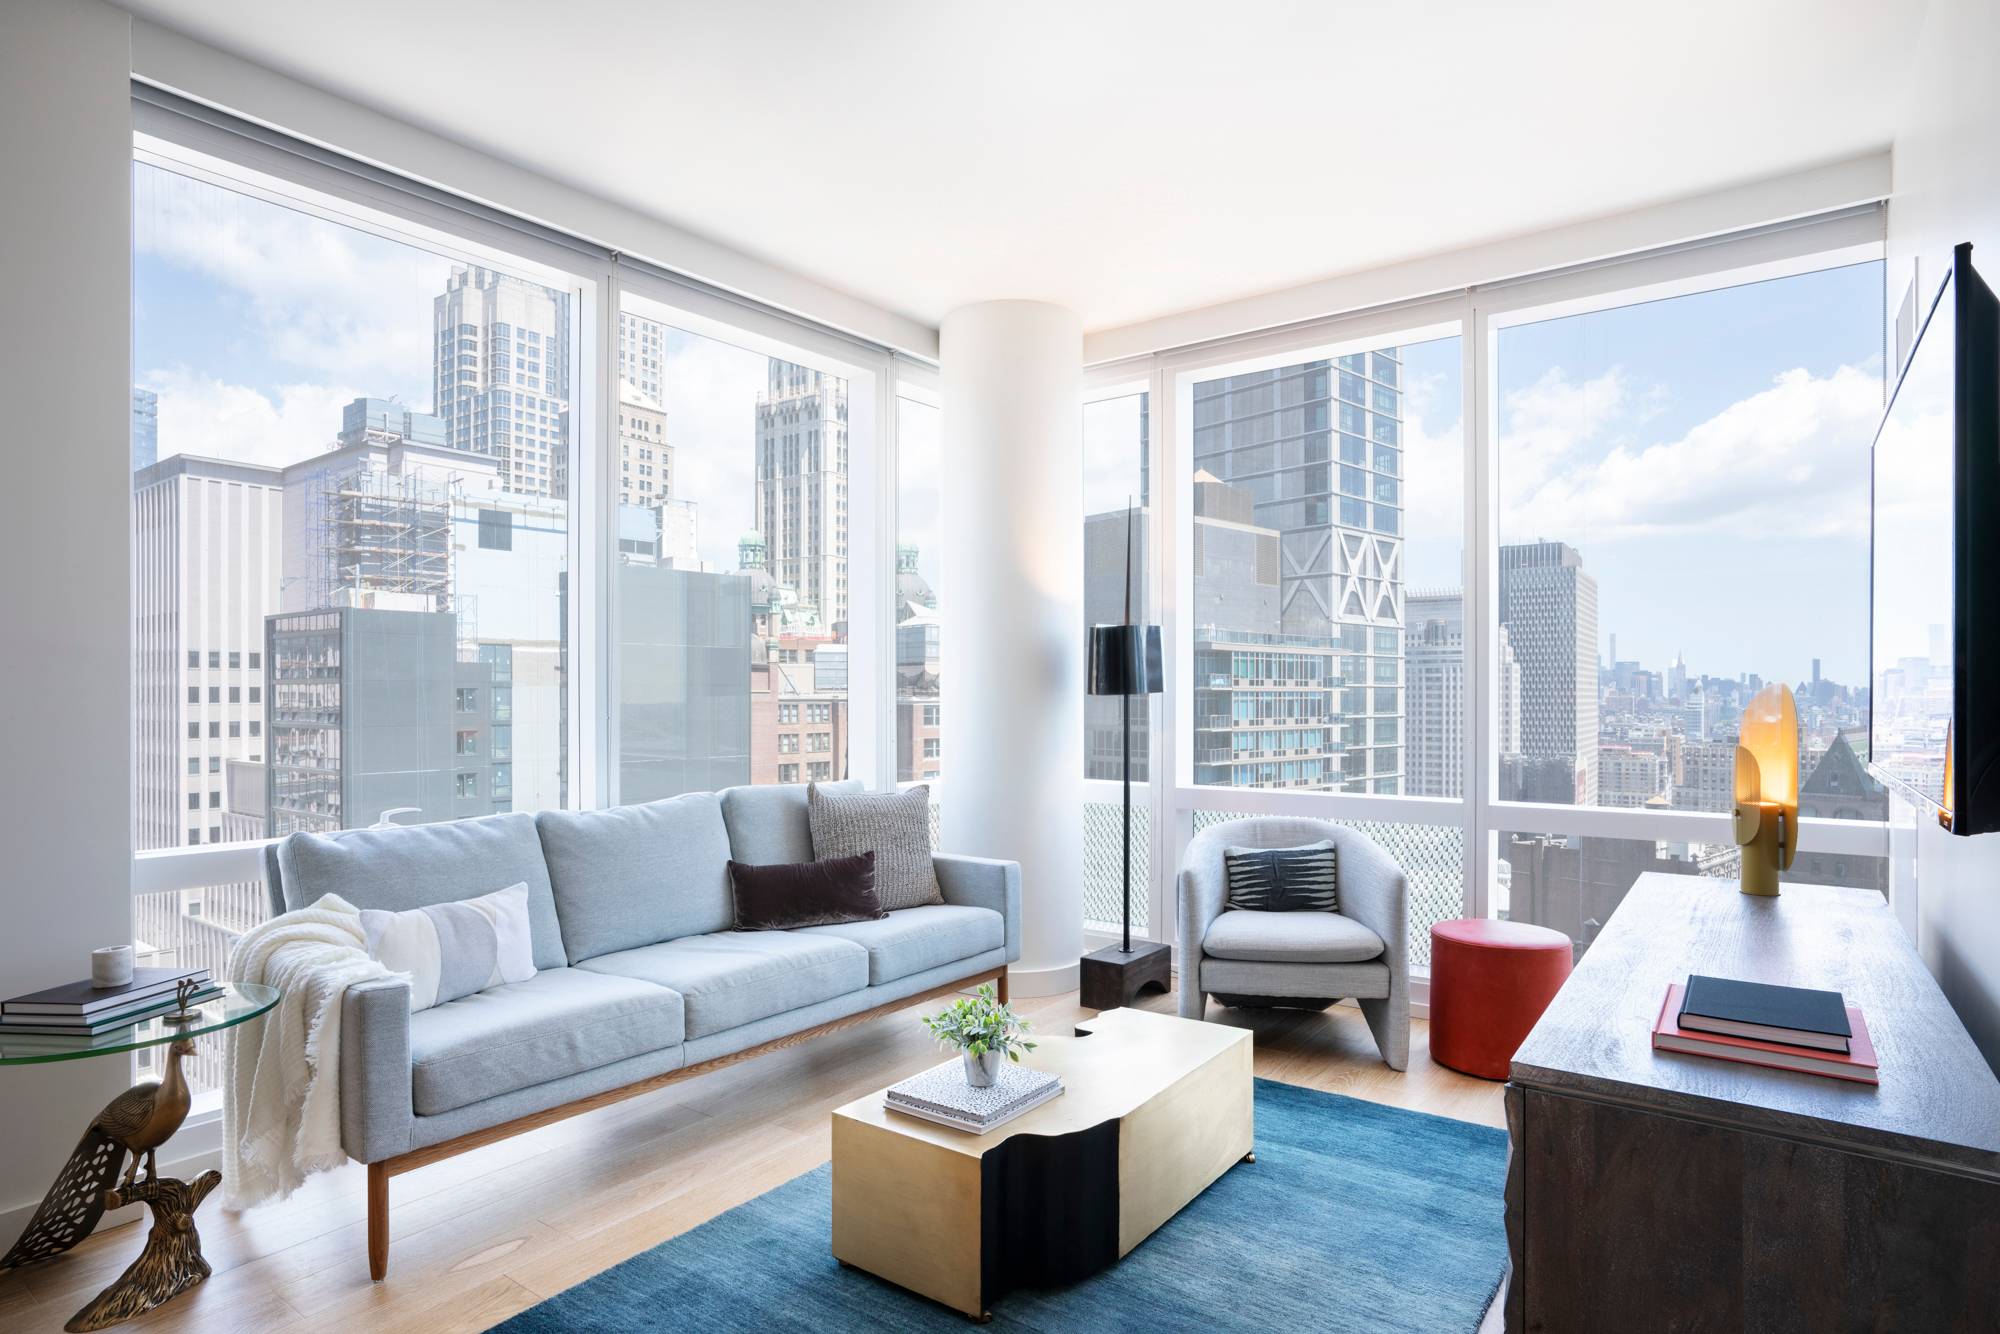 NO BROKER FEE AMAZING 1 BEDROOM CONV. 2 LUXURY APARTMENT IN THE HEART OF FIDI!!!